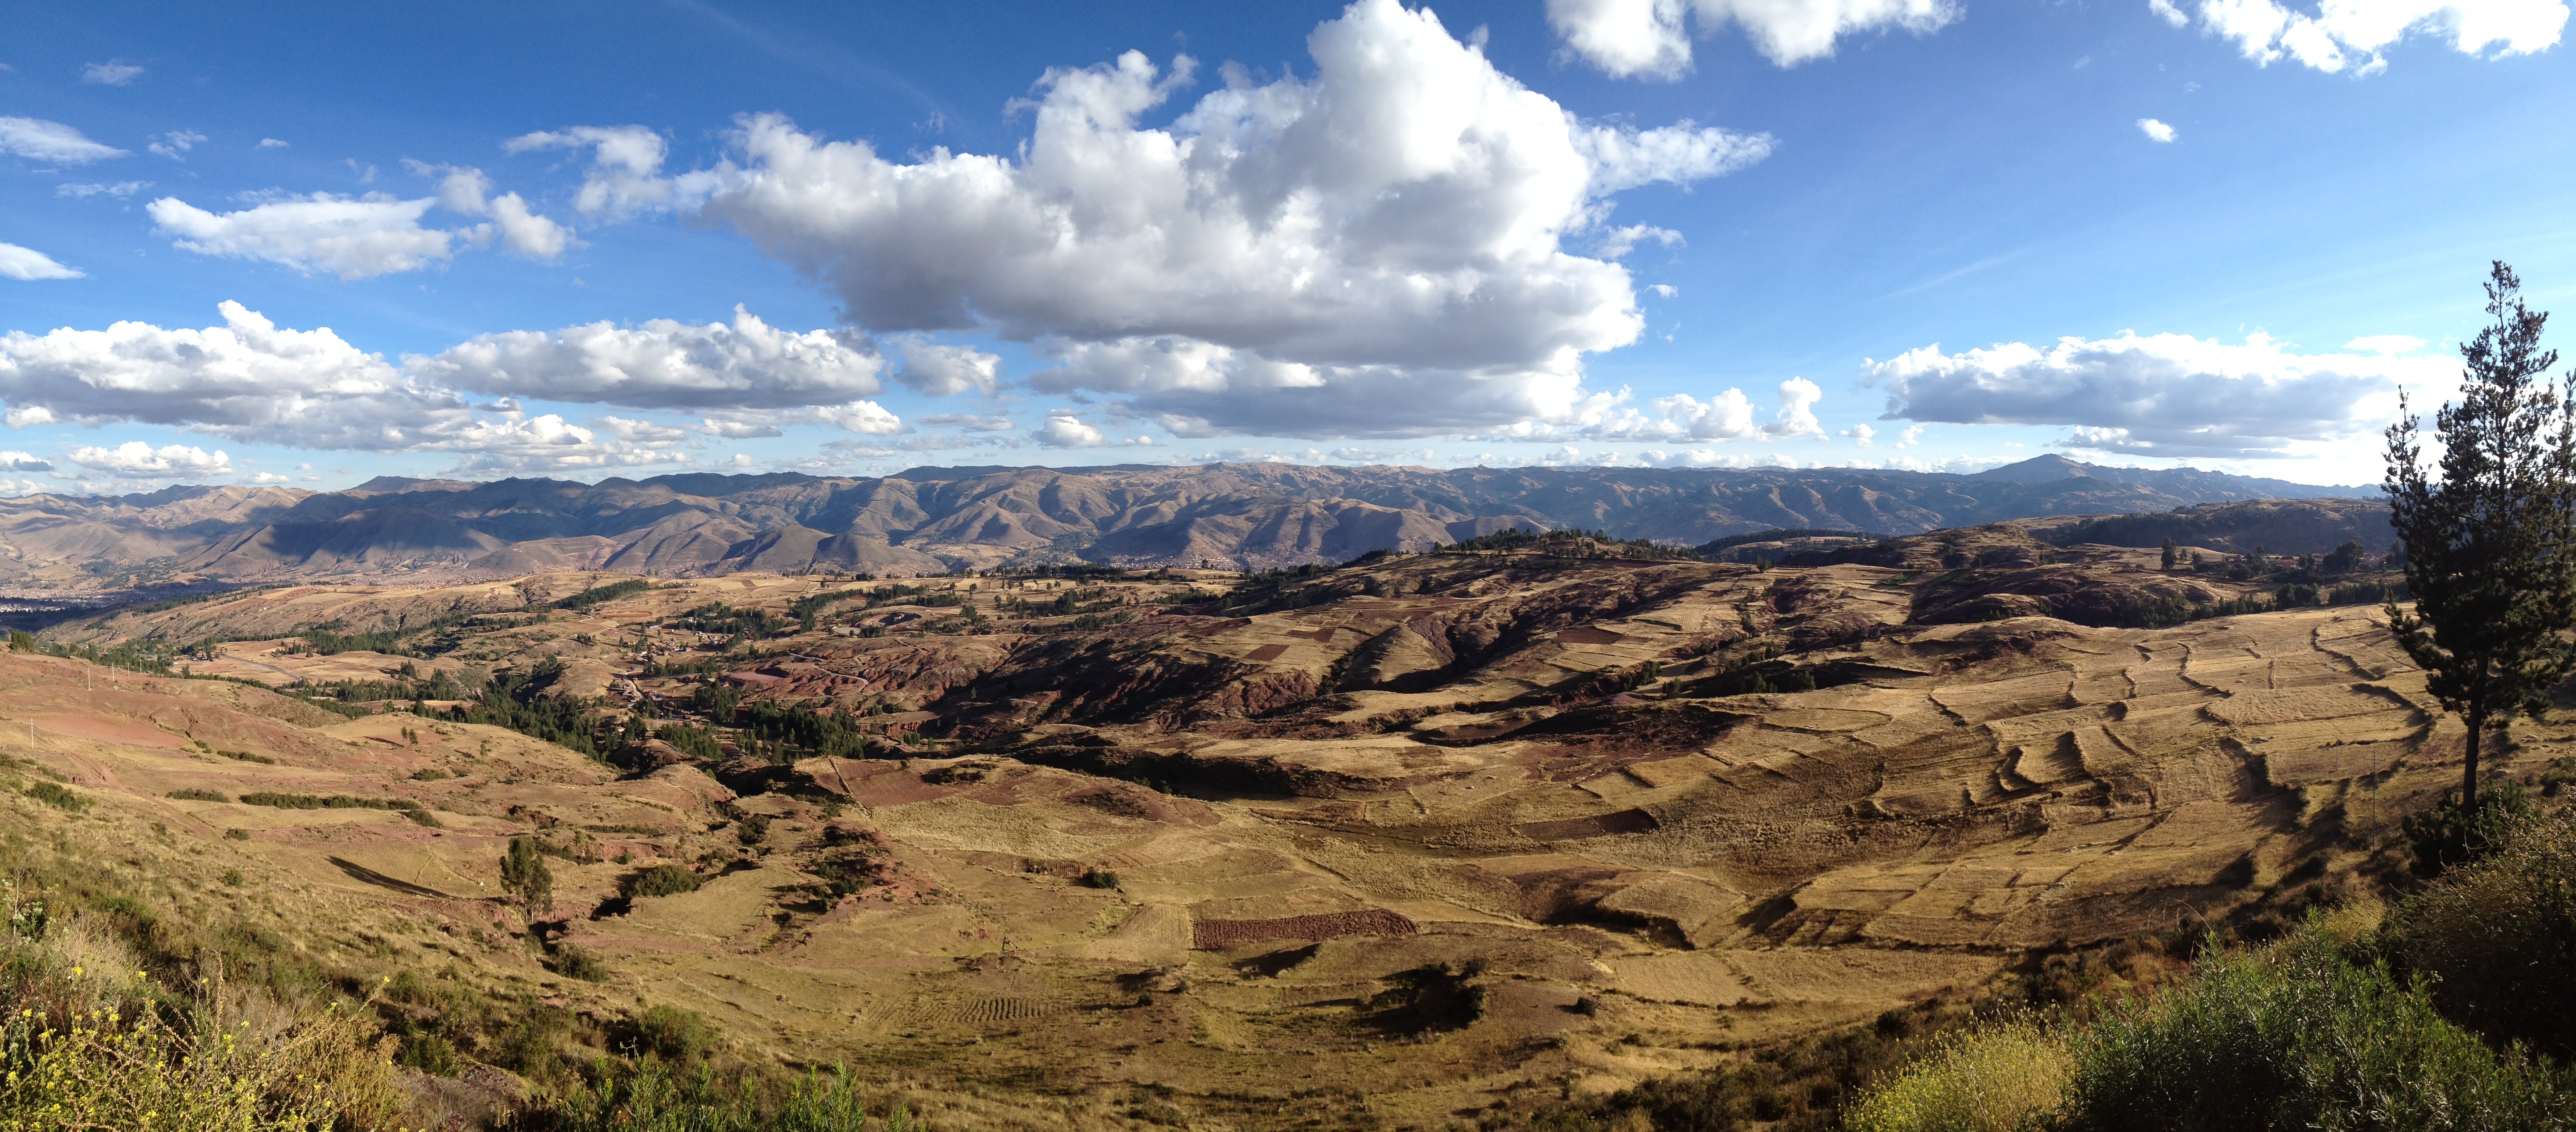 On our way back into Cusco 